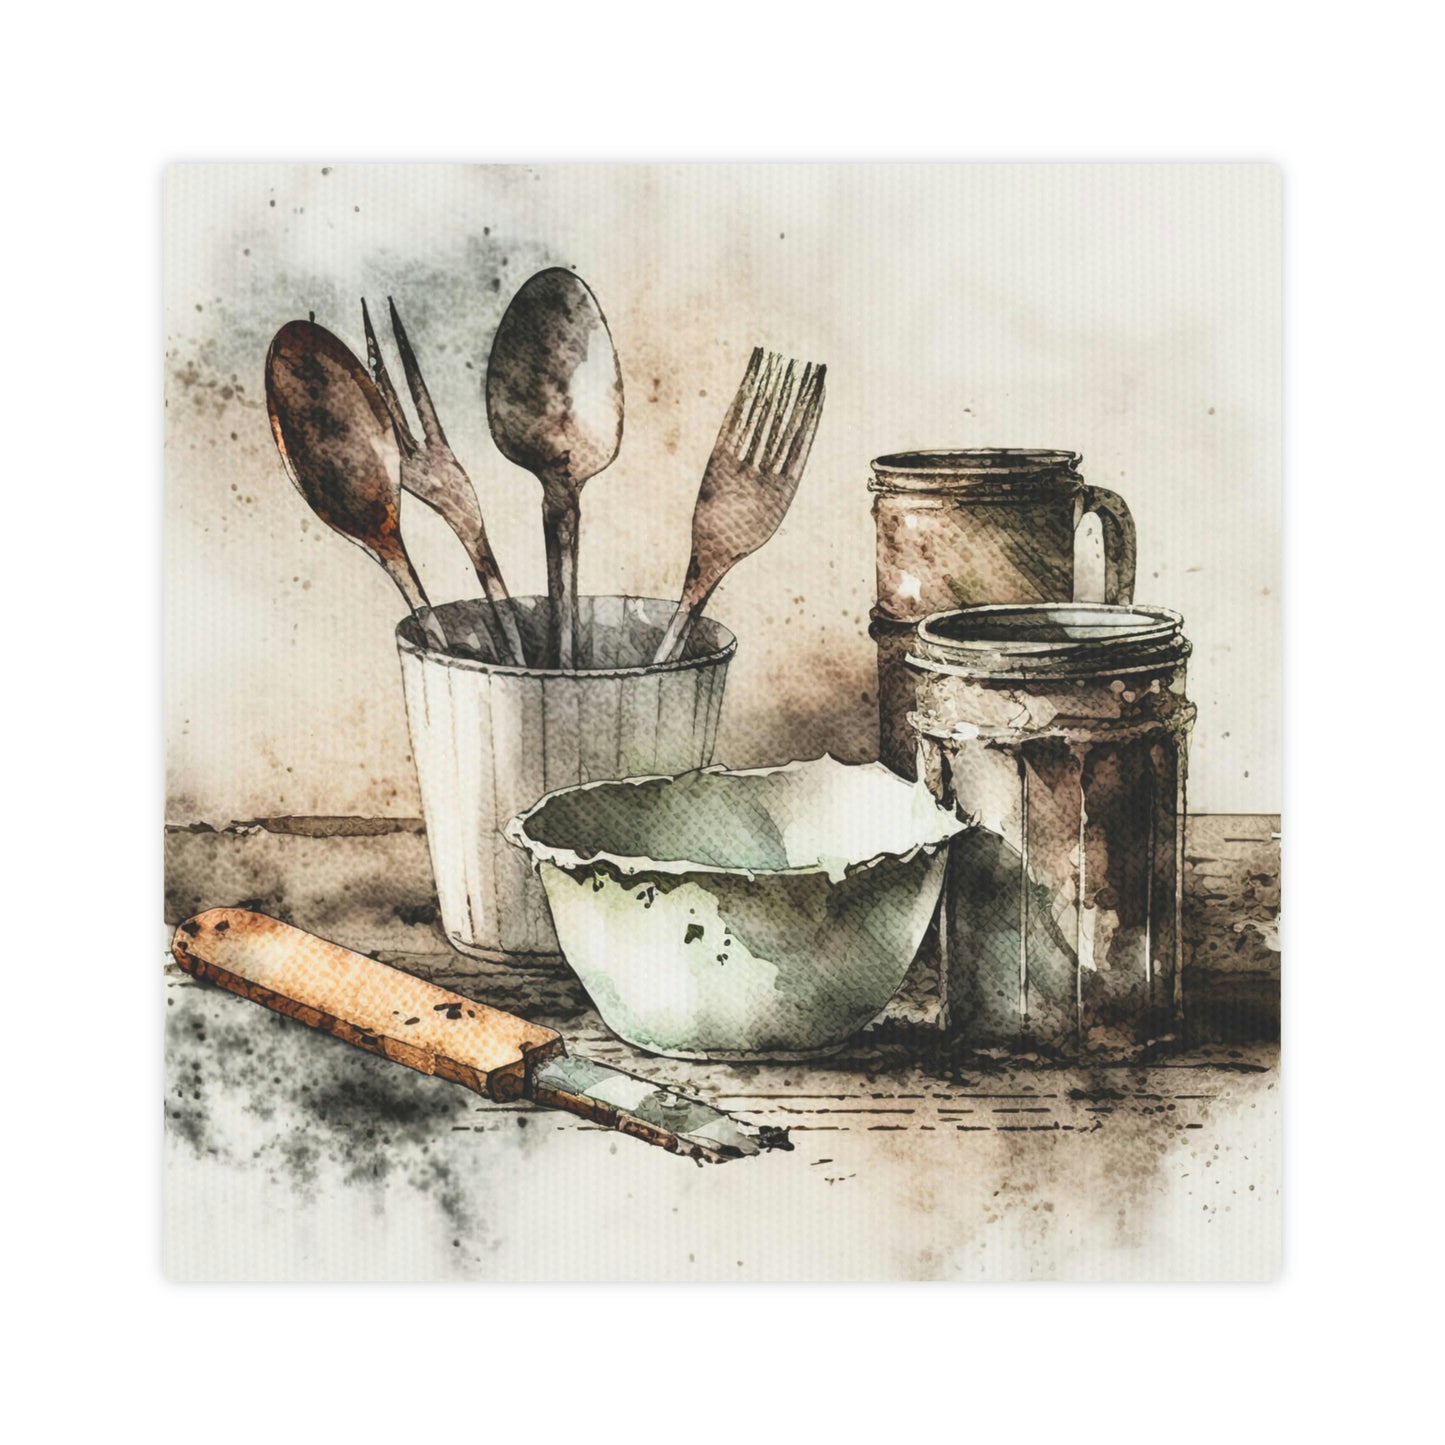 "Antique Utensils" Wall Art - Weave Got Gifts - Unique Gifts You Won’t Find Anywhere Else!